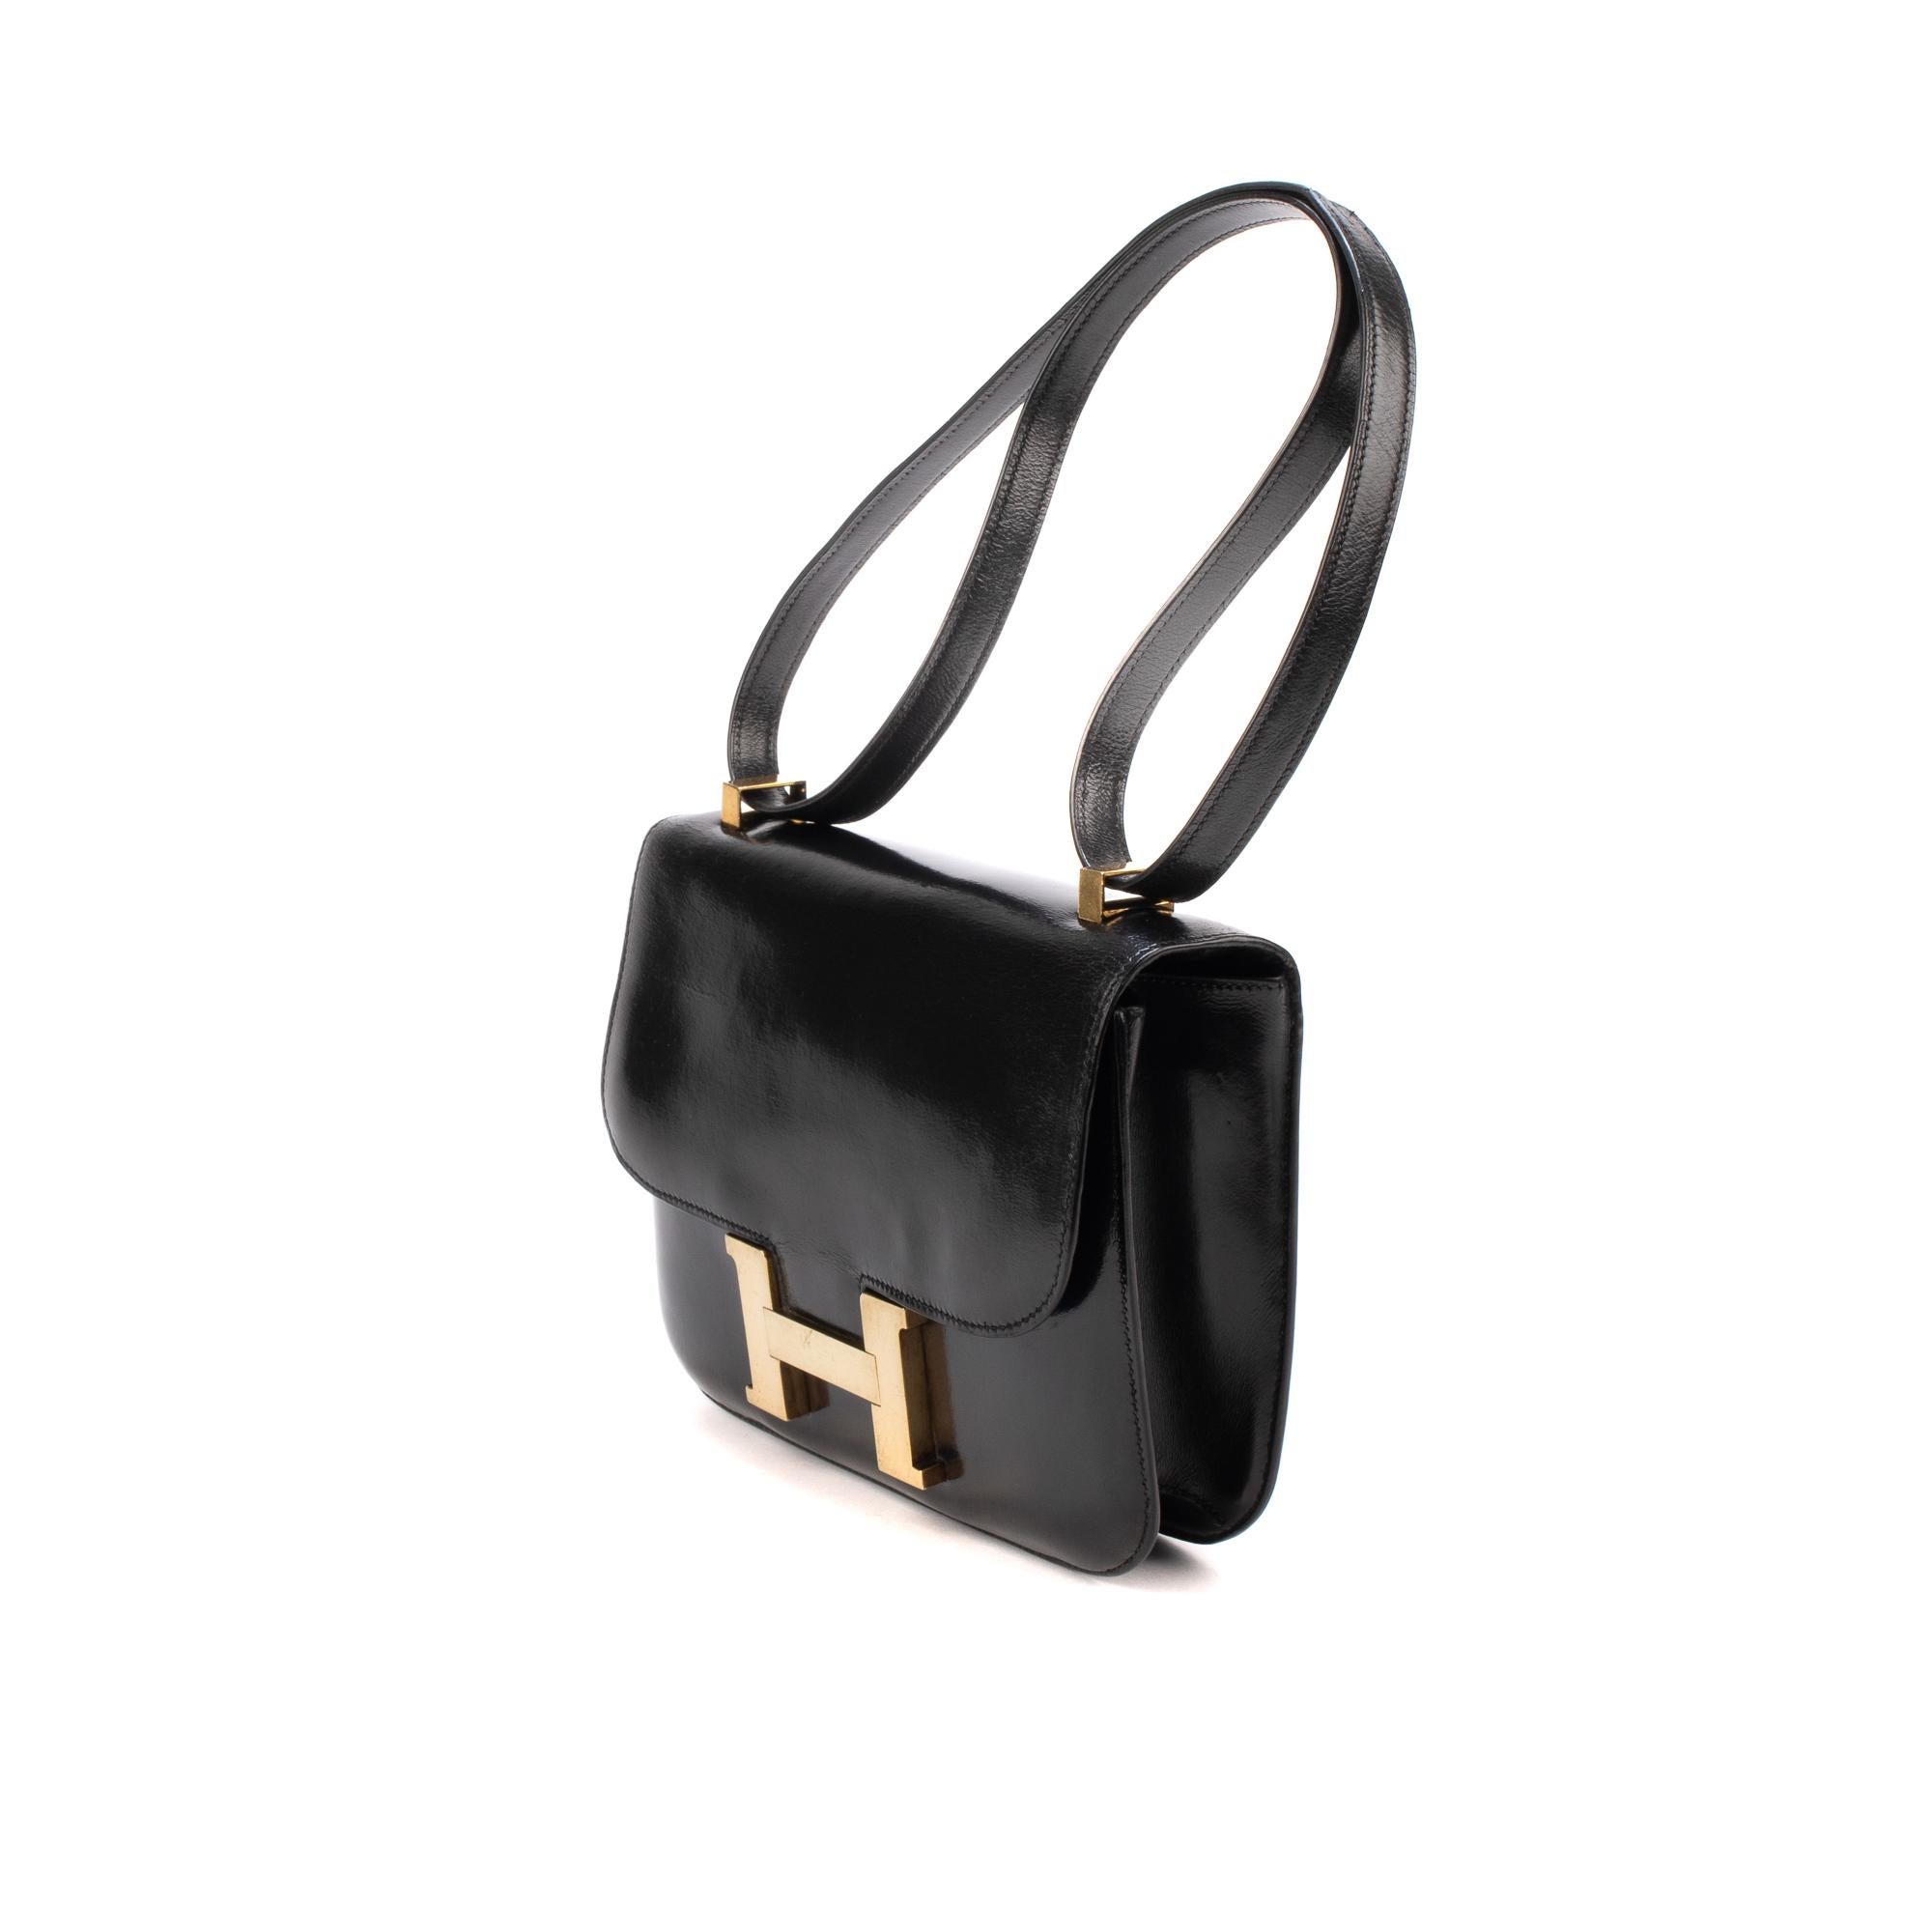 Very beautiful Hermes Constance handbag in black box leather, gold metal trim, convertible handle in black leather for hand or shoulder wear.

H closure on flap.
A patch pocket on the back of the bag.
Black leather lining, zipped pocket, patch